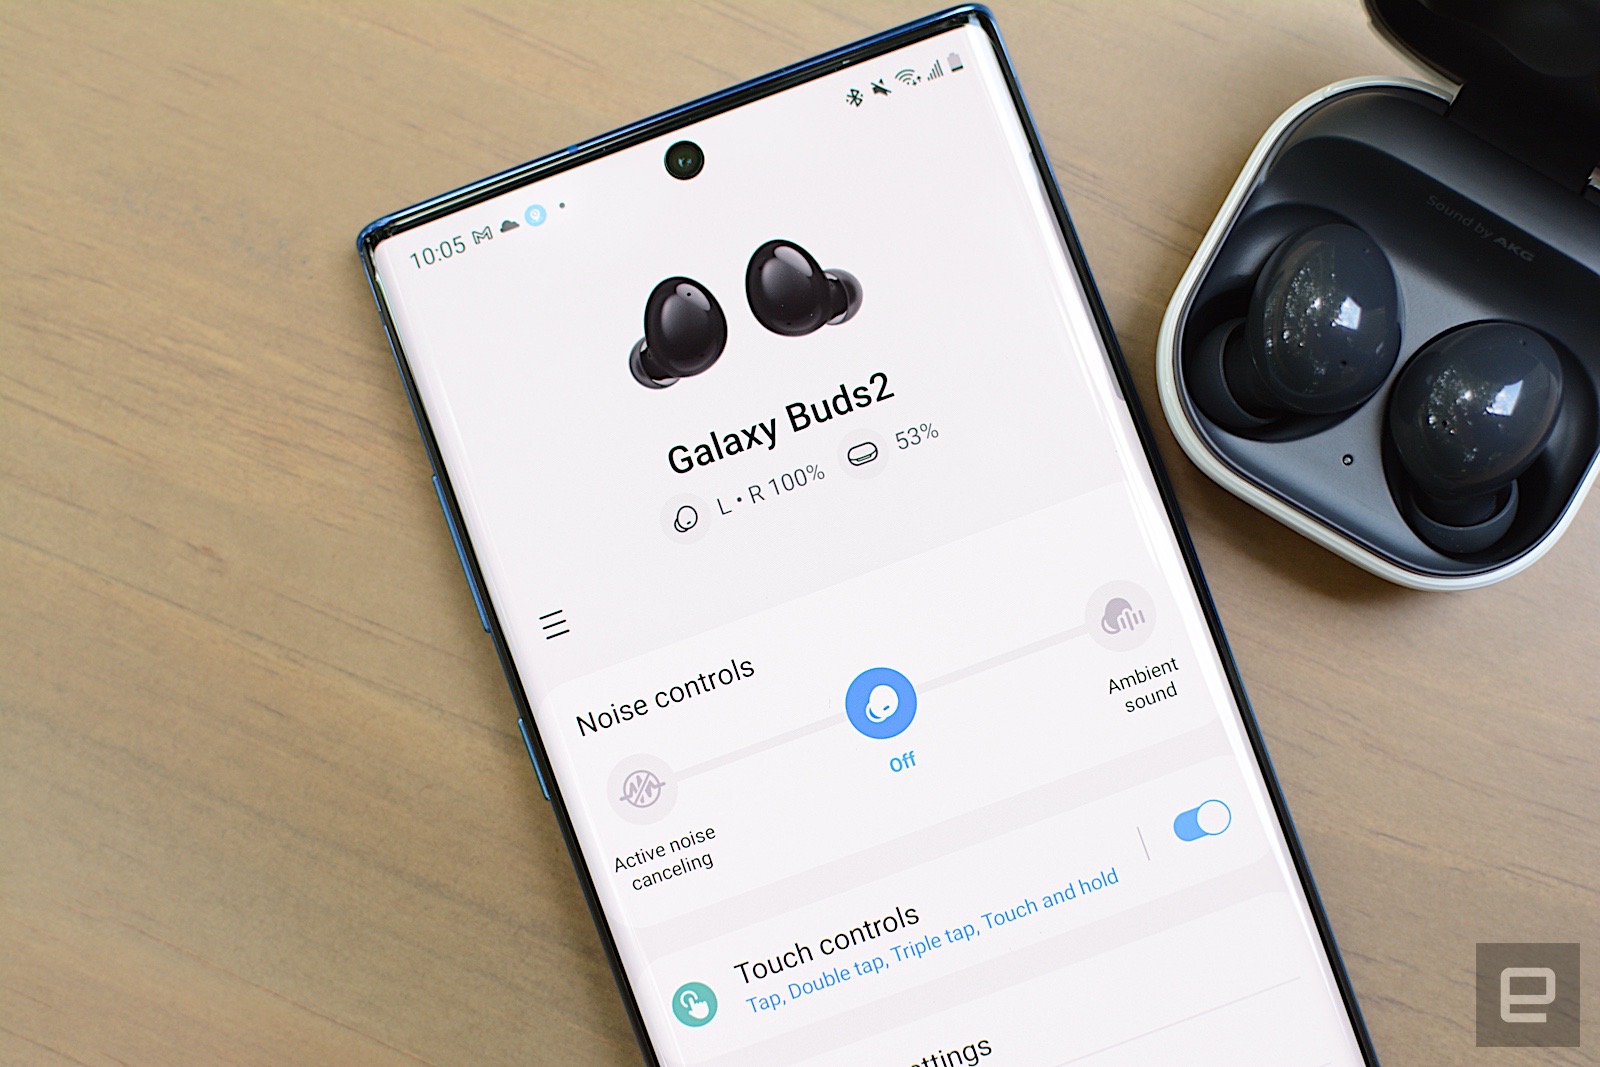 With the Galaxy Buds 2, Samsung adds active noise cancellation to its most affordable true wireless earbuds. This successor to the Galaxy Buds+ are smaller and more comfortable with premium features like wireless charging and adjustable ambient sound. However, ANC performance is only decent and there’s no deep iOS integration like previous models. Still, at this price, Samsung has created a compelling package despite the sacrifices. 